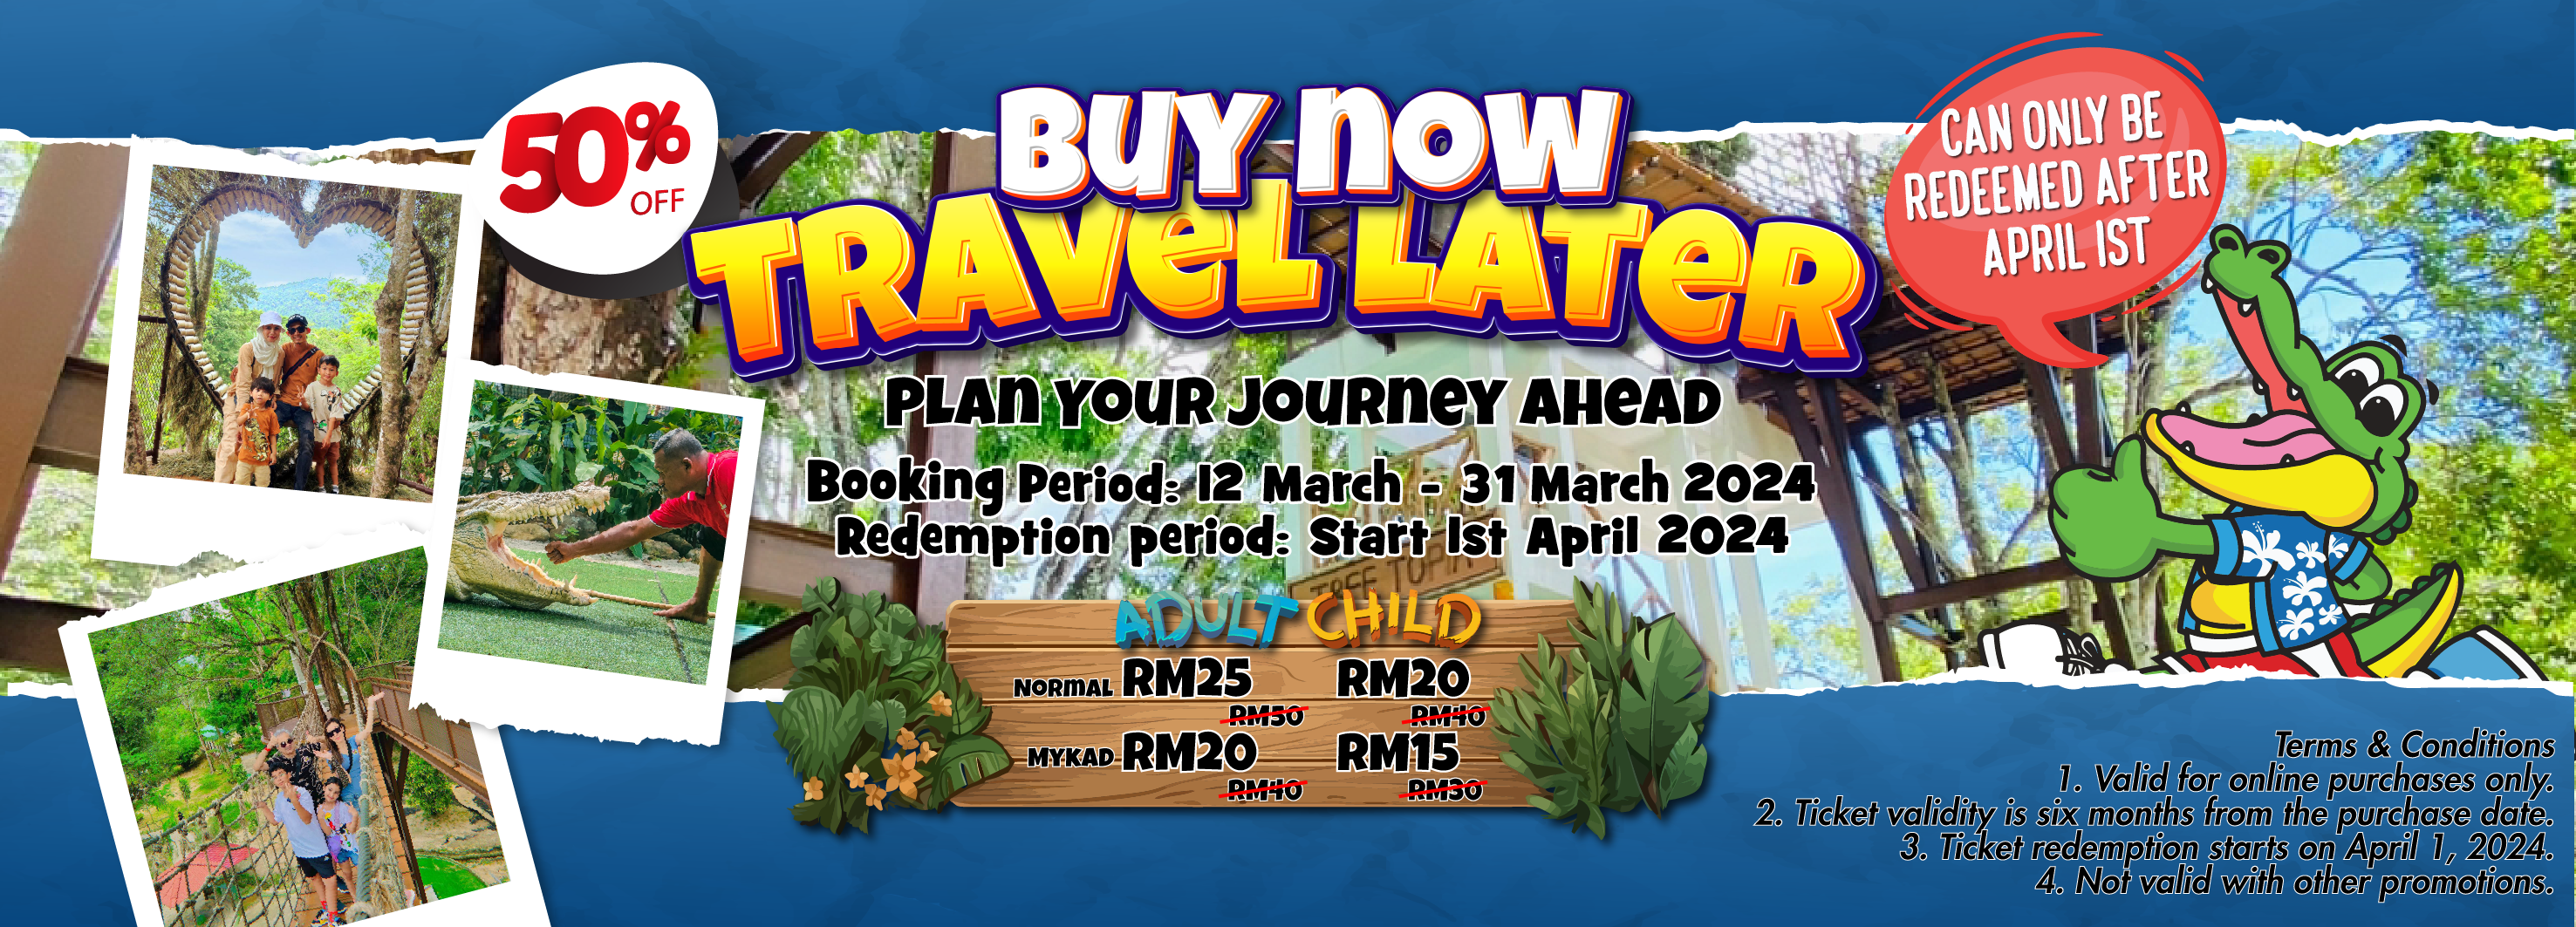 buy now travel later